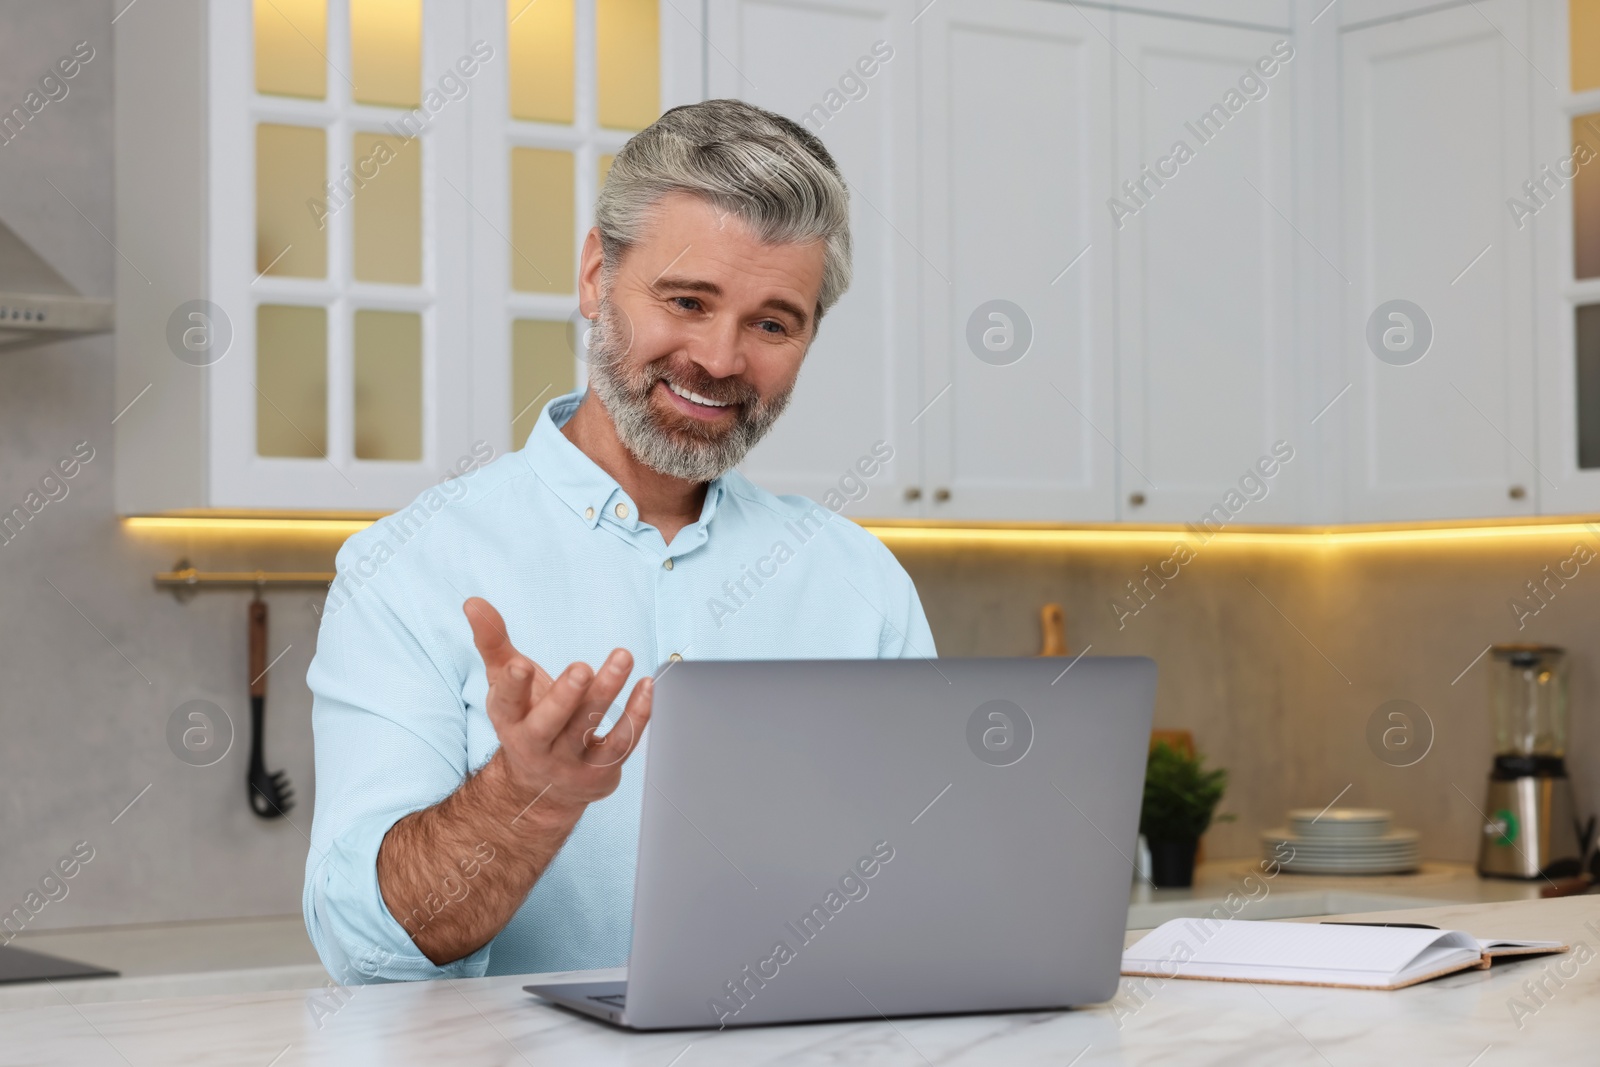 Photo of Man waving hello during video chat via laptop at home